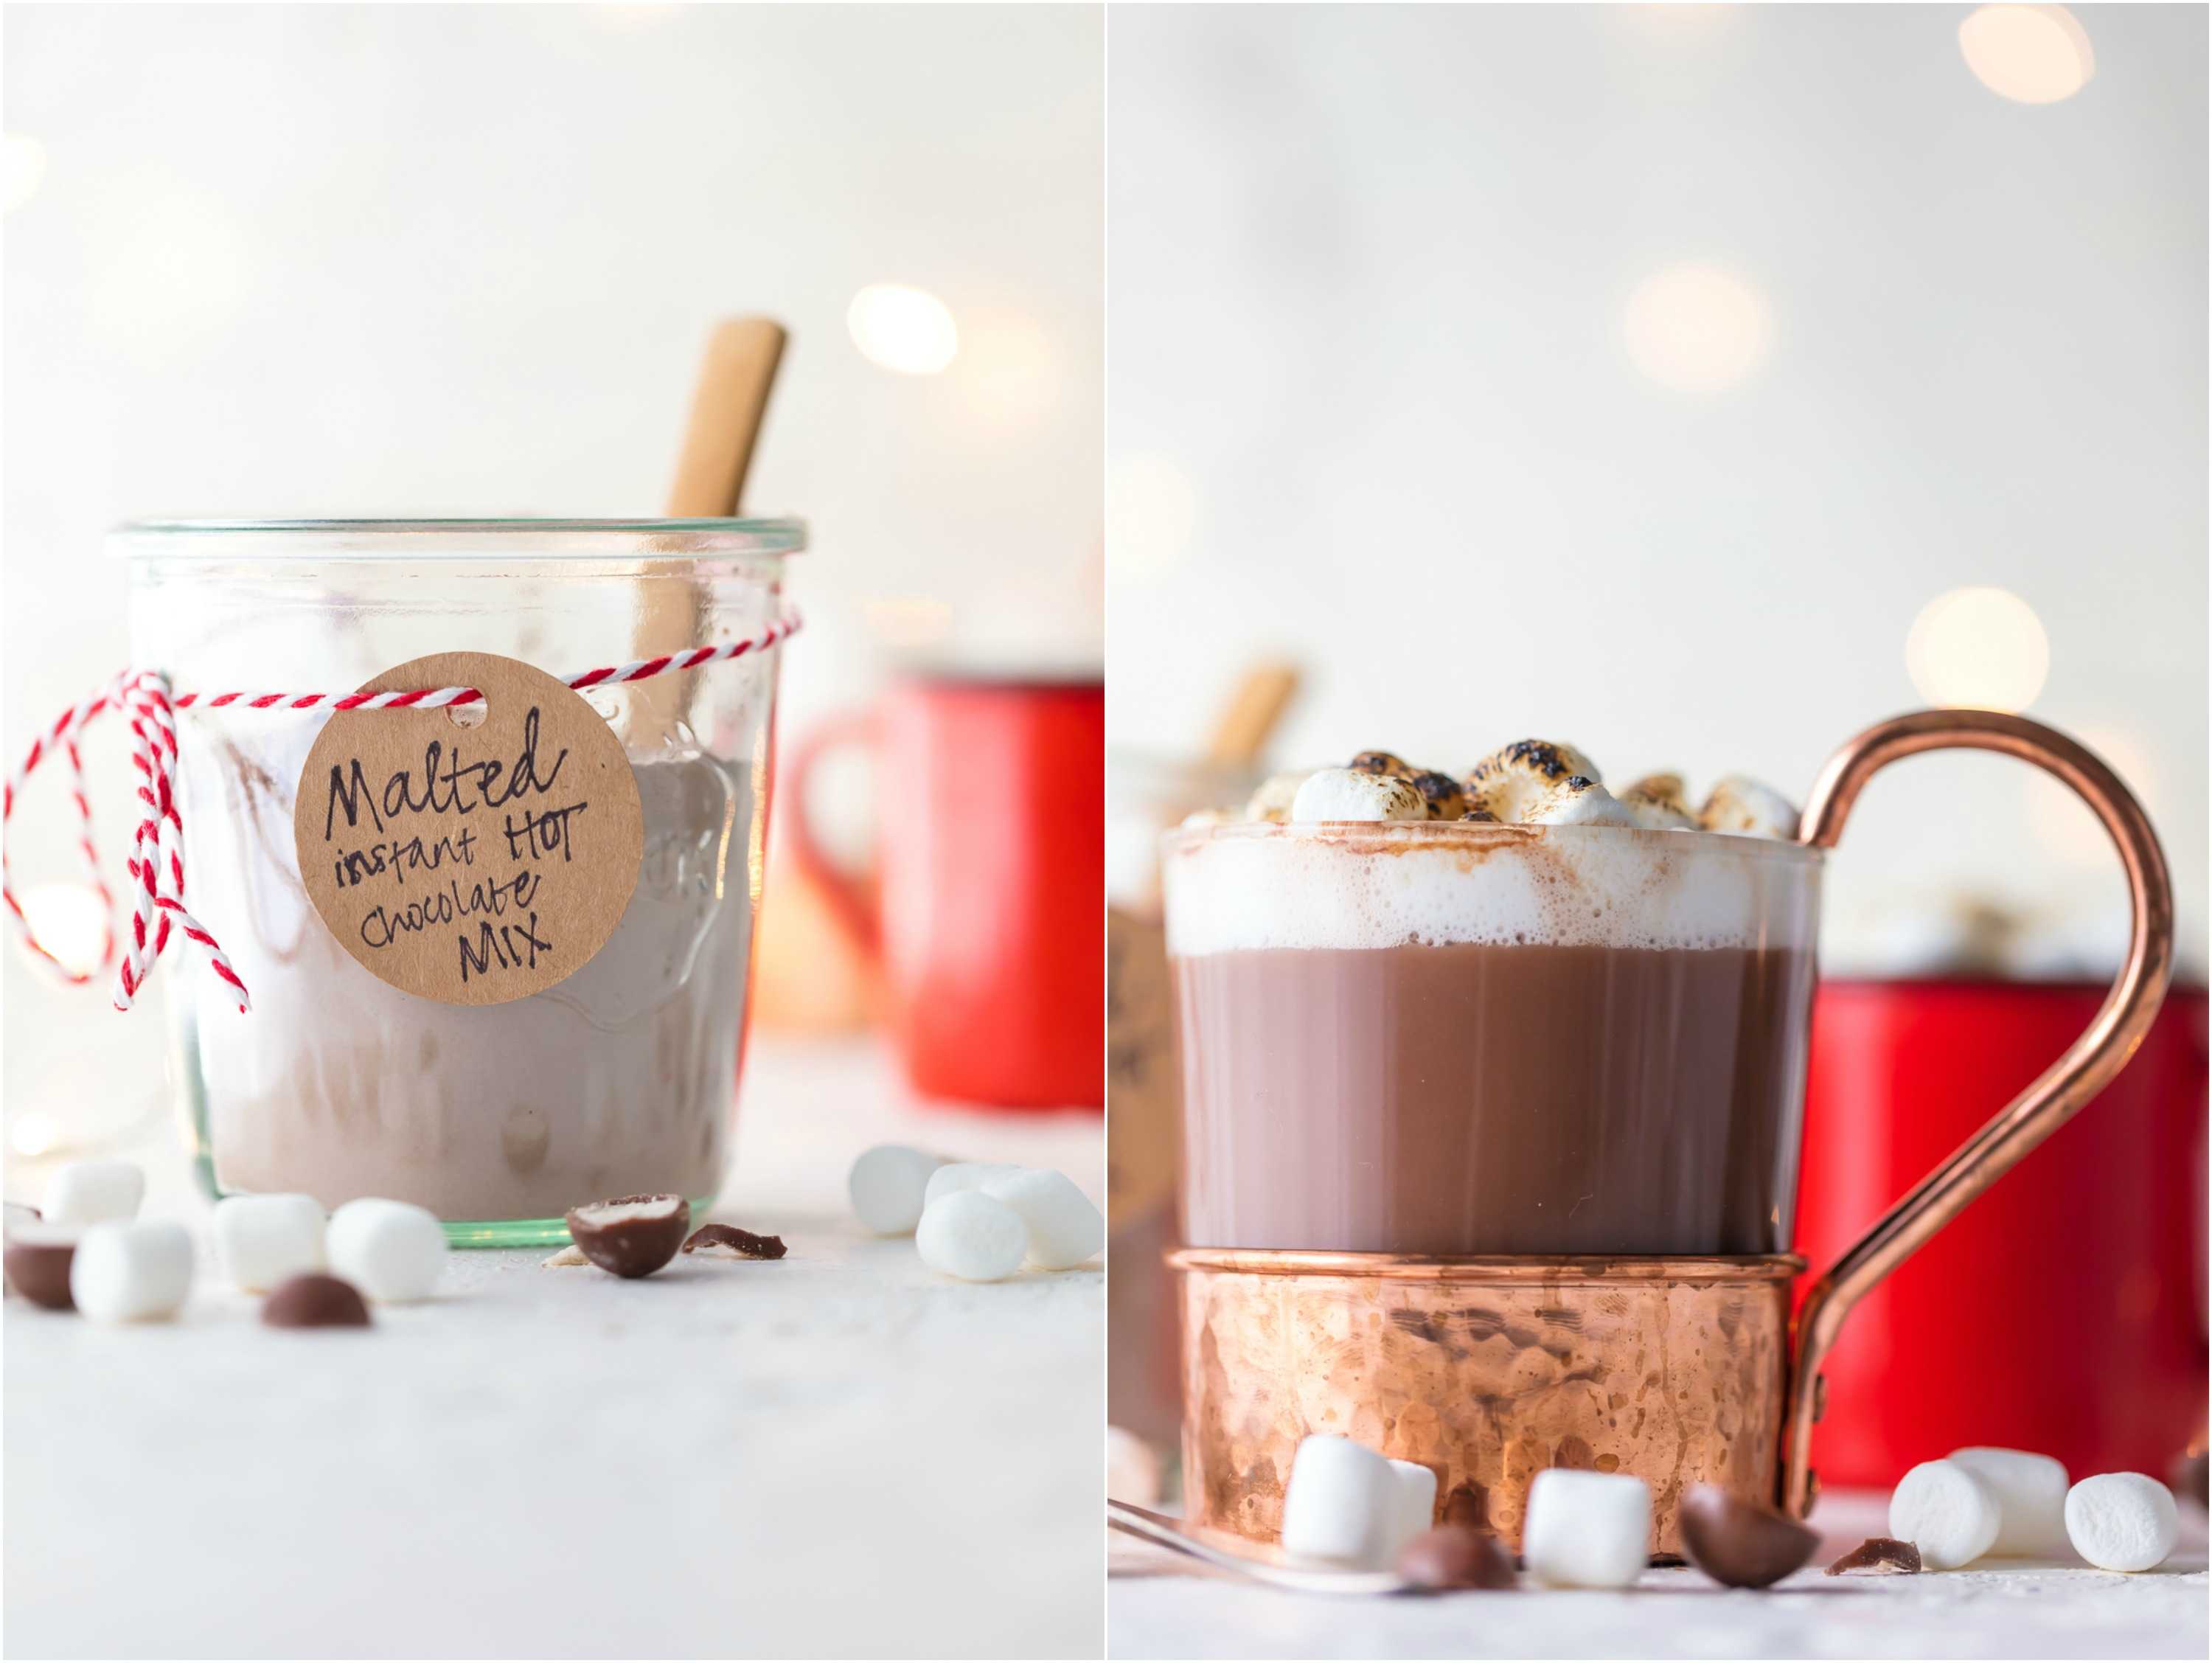 MALTED INSTANT HOT CHOCOLATE MIX is so easy to make at home and perfect for homemade Christmas gifts! You'll never buy premade mix again! The added malt flavor takes it over the top and makes it one of my most favorite versions of hot cocoa!